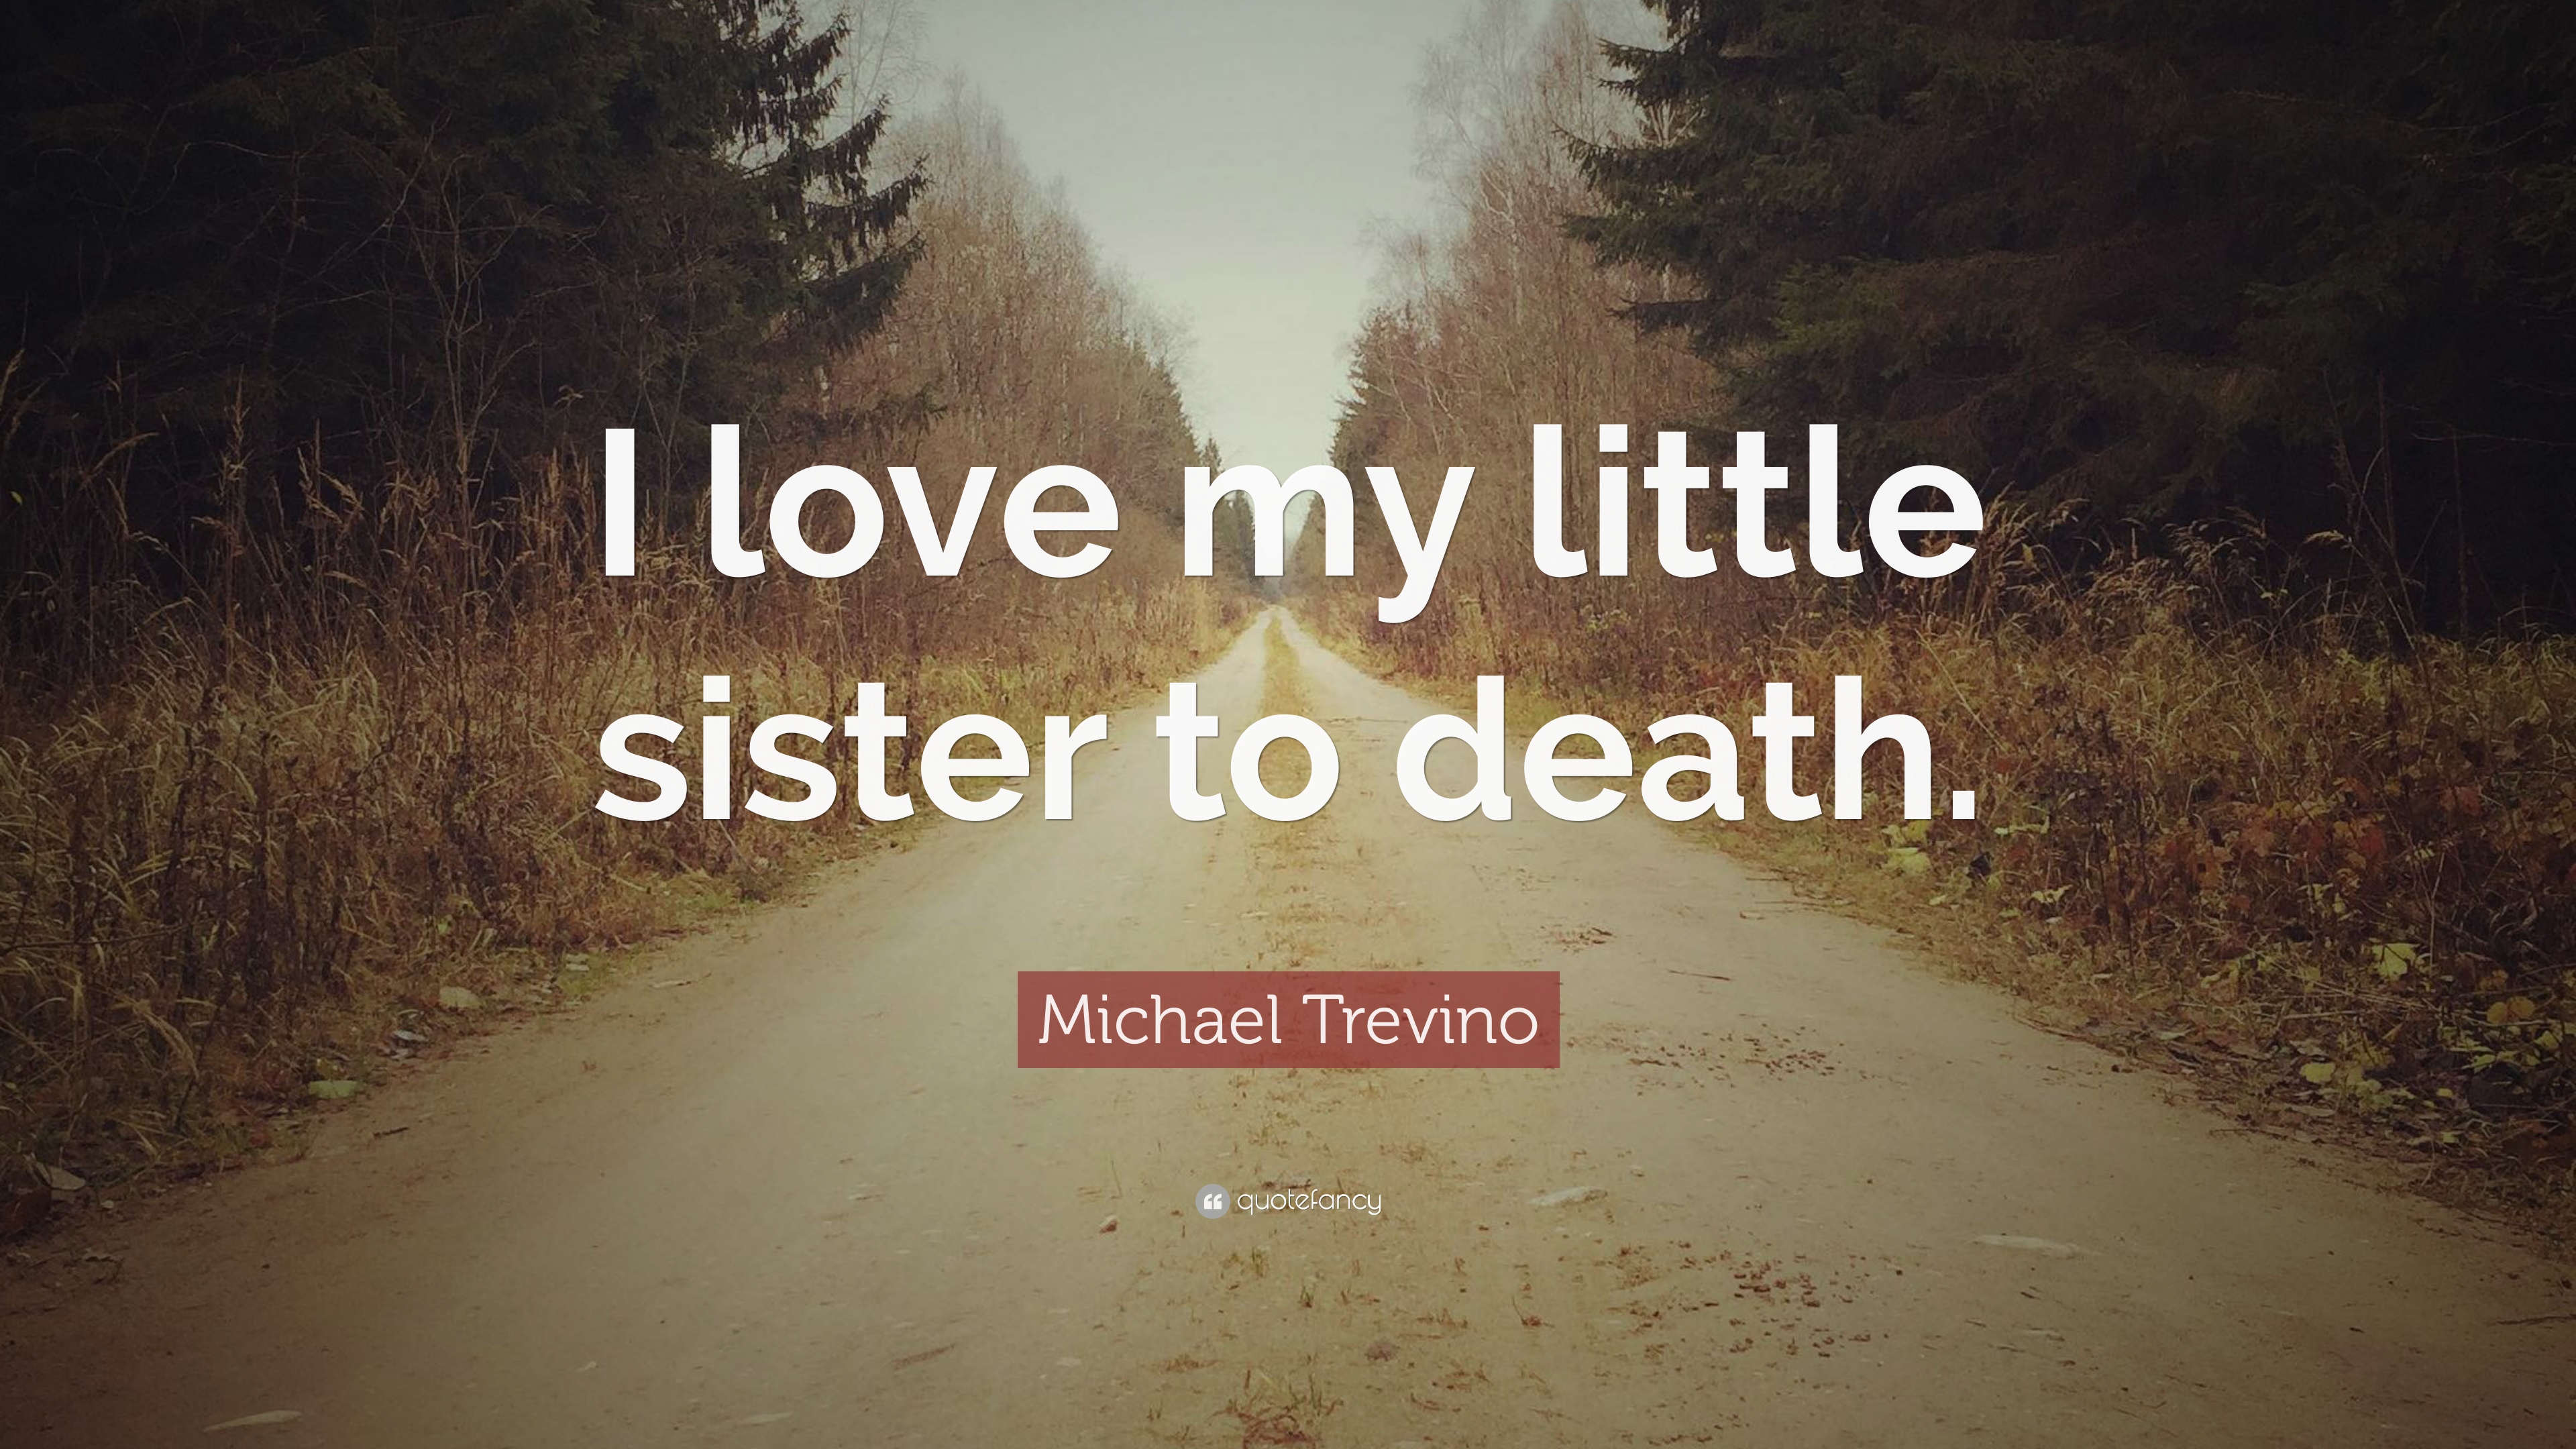 Michael Trevino Quote: “I love my little sister to death.” 7